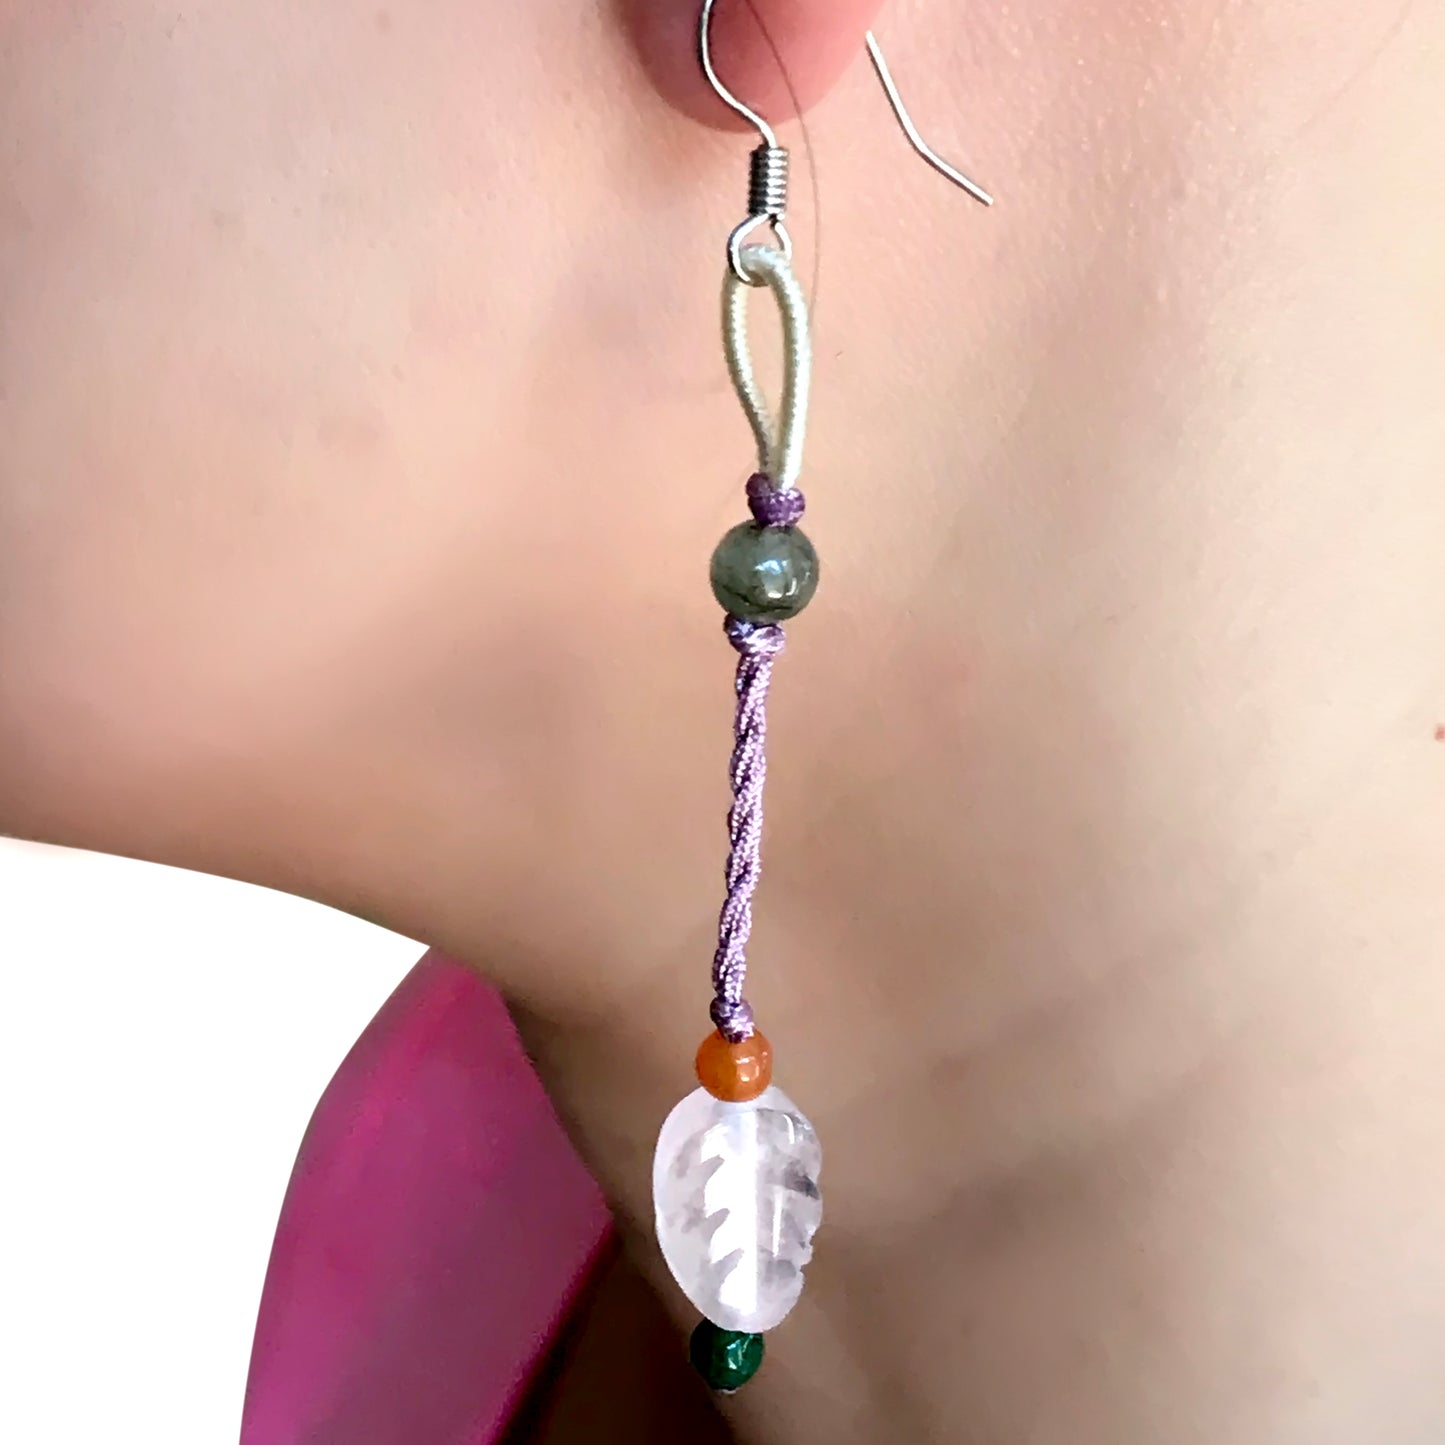 Get Leafy with Simple Rose Quartz Leaf Earrings